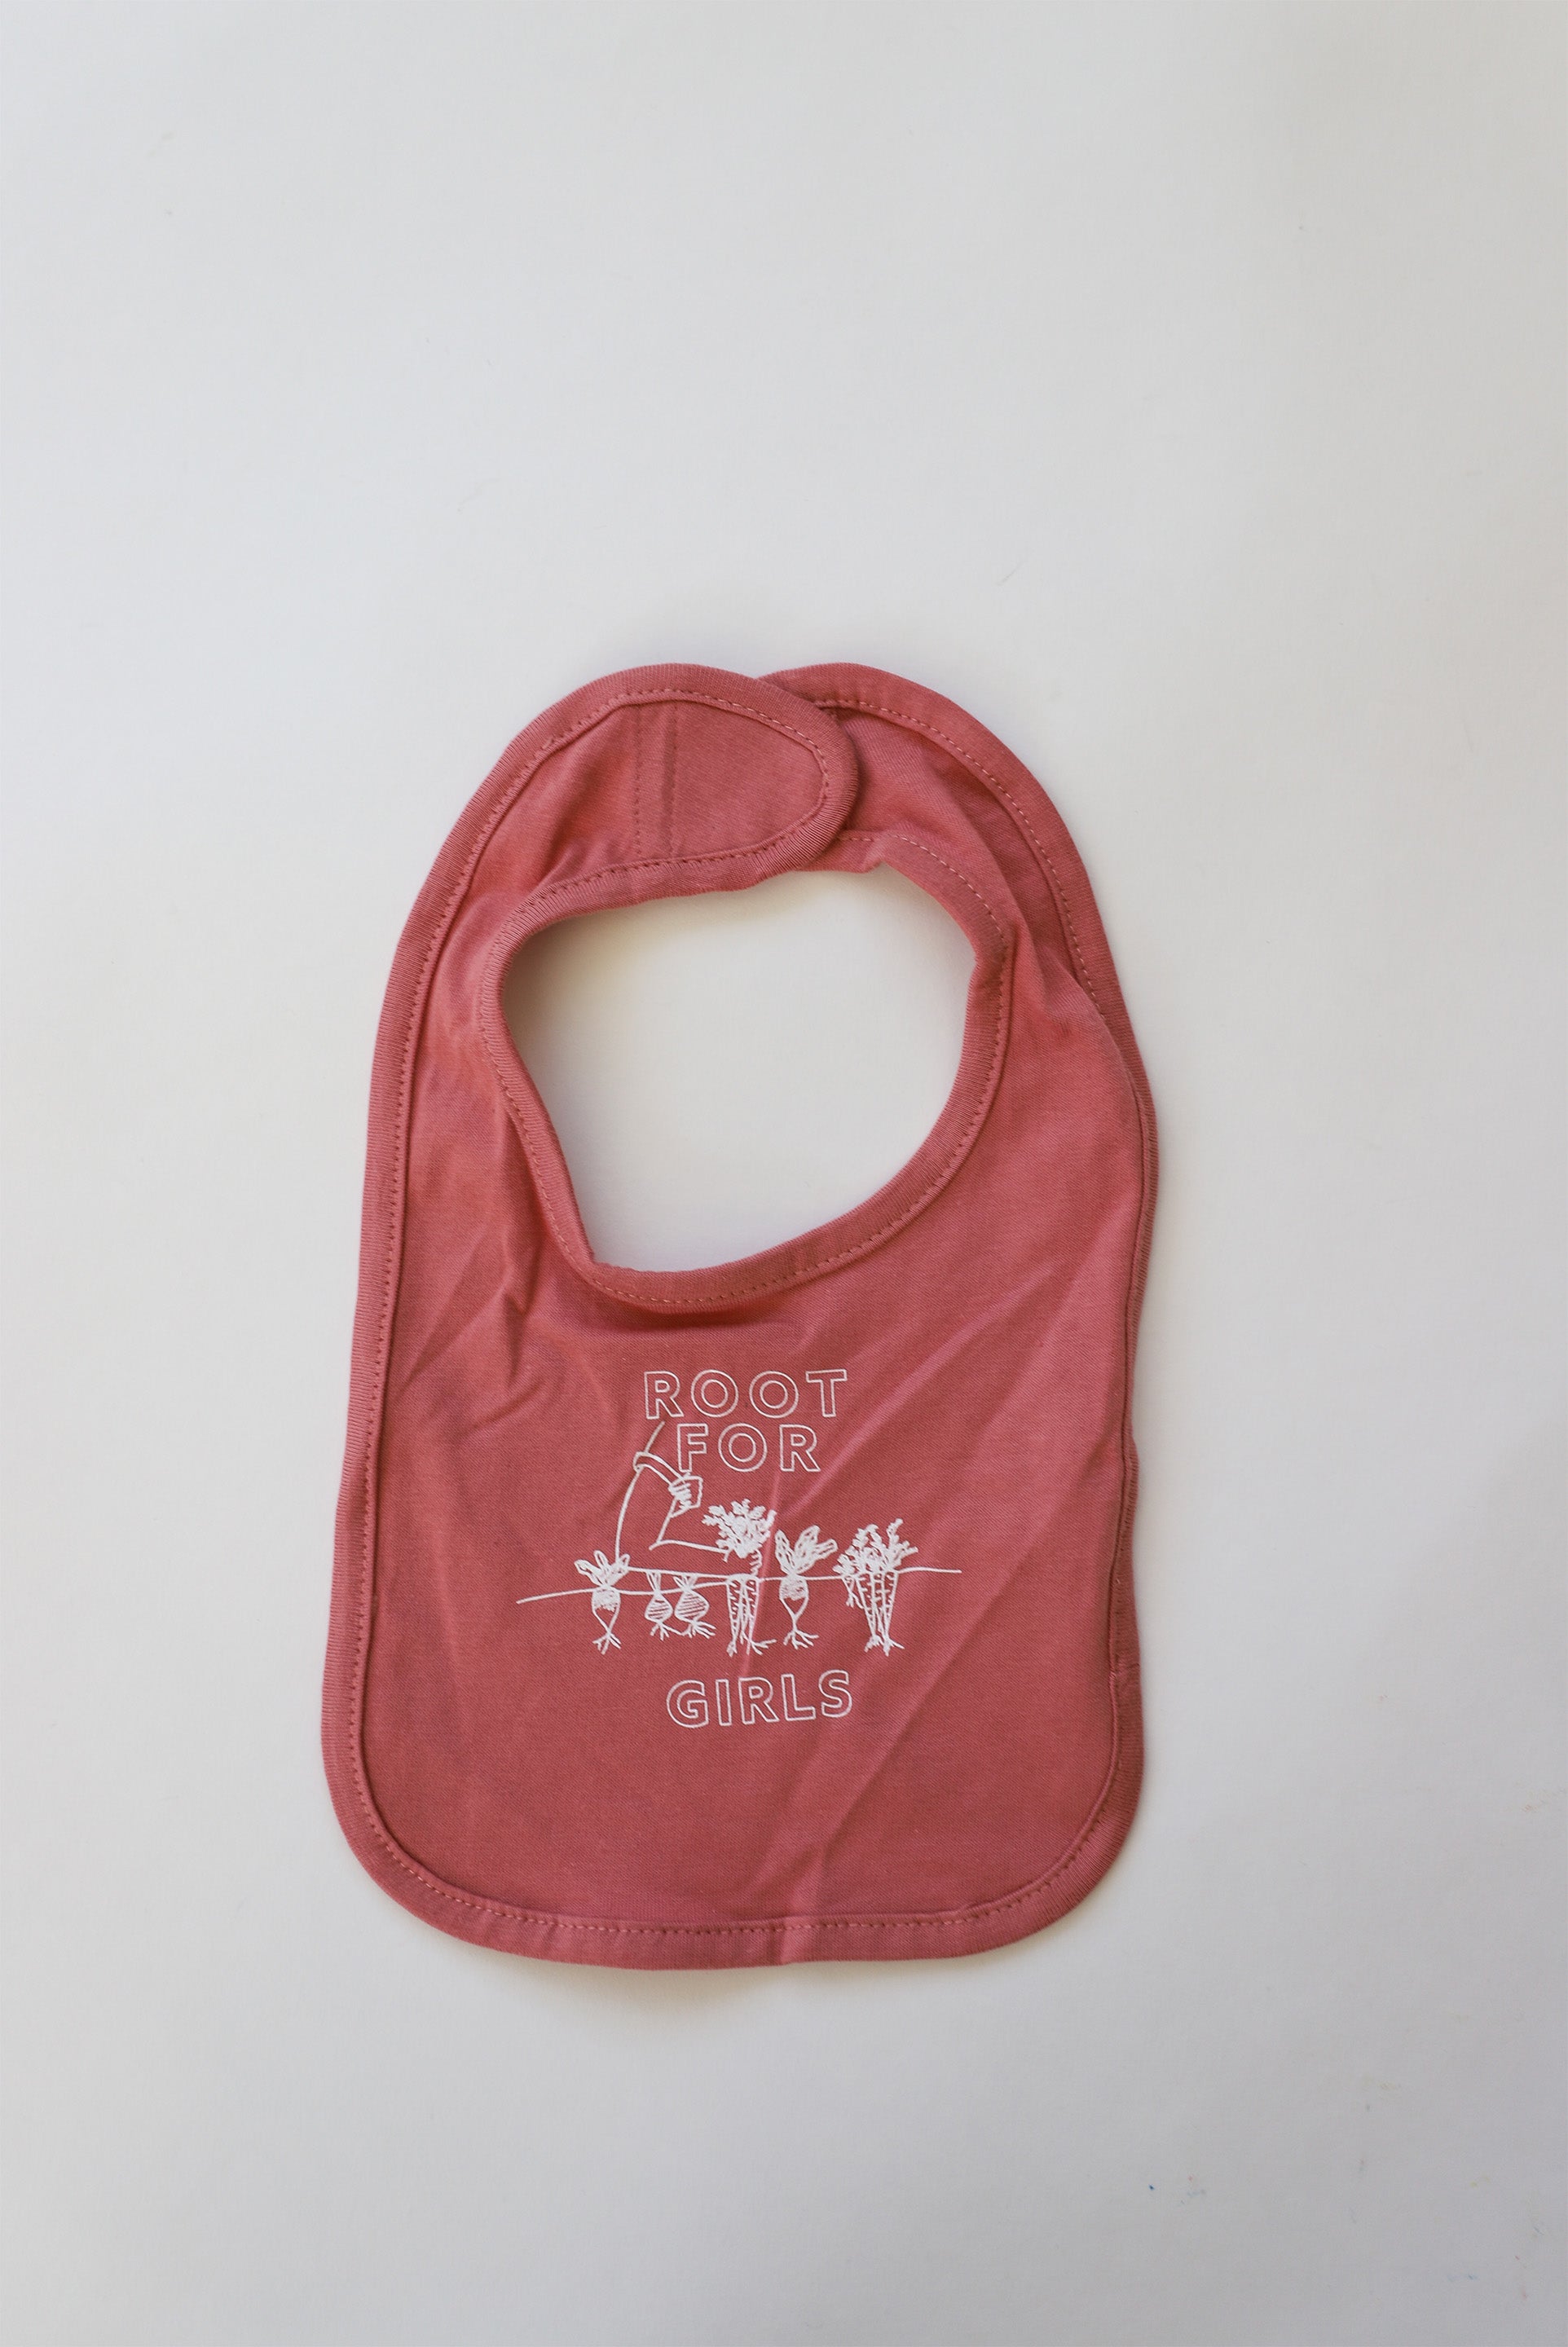 Pink baby bib with the words "Root for Girls" in white block letters with a gardening design